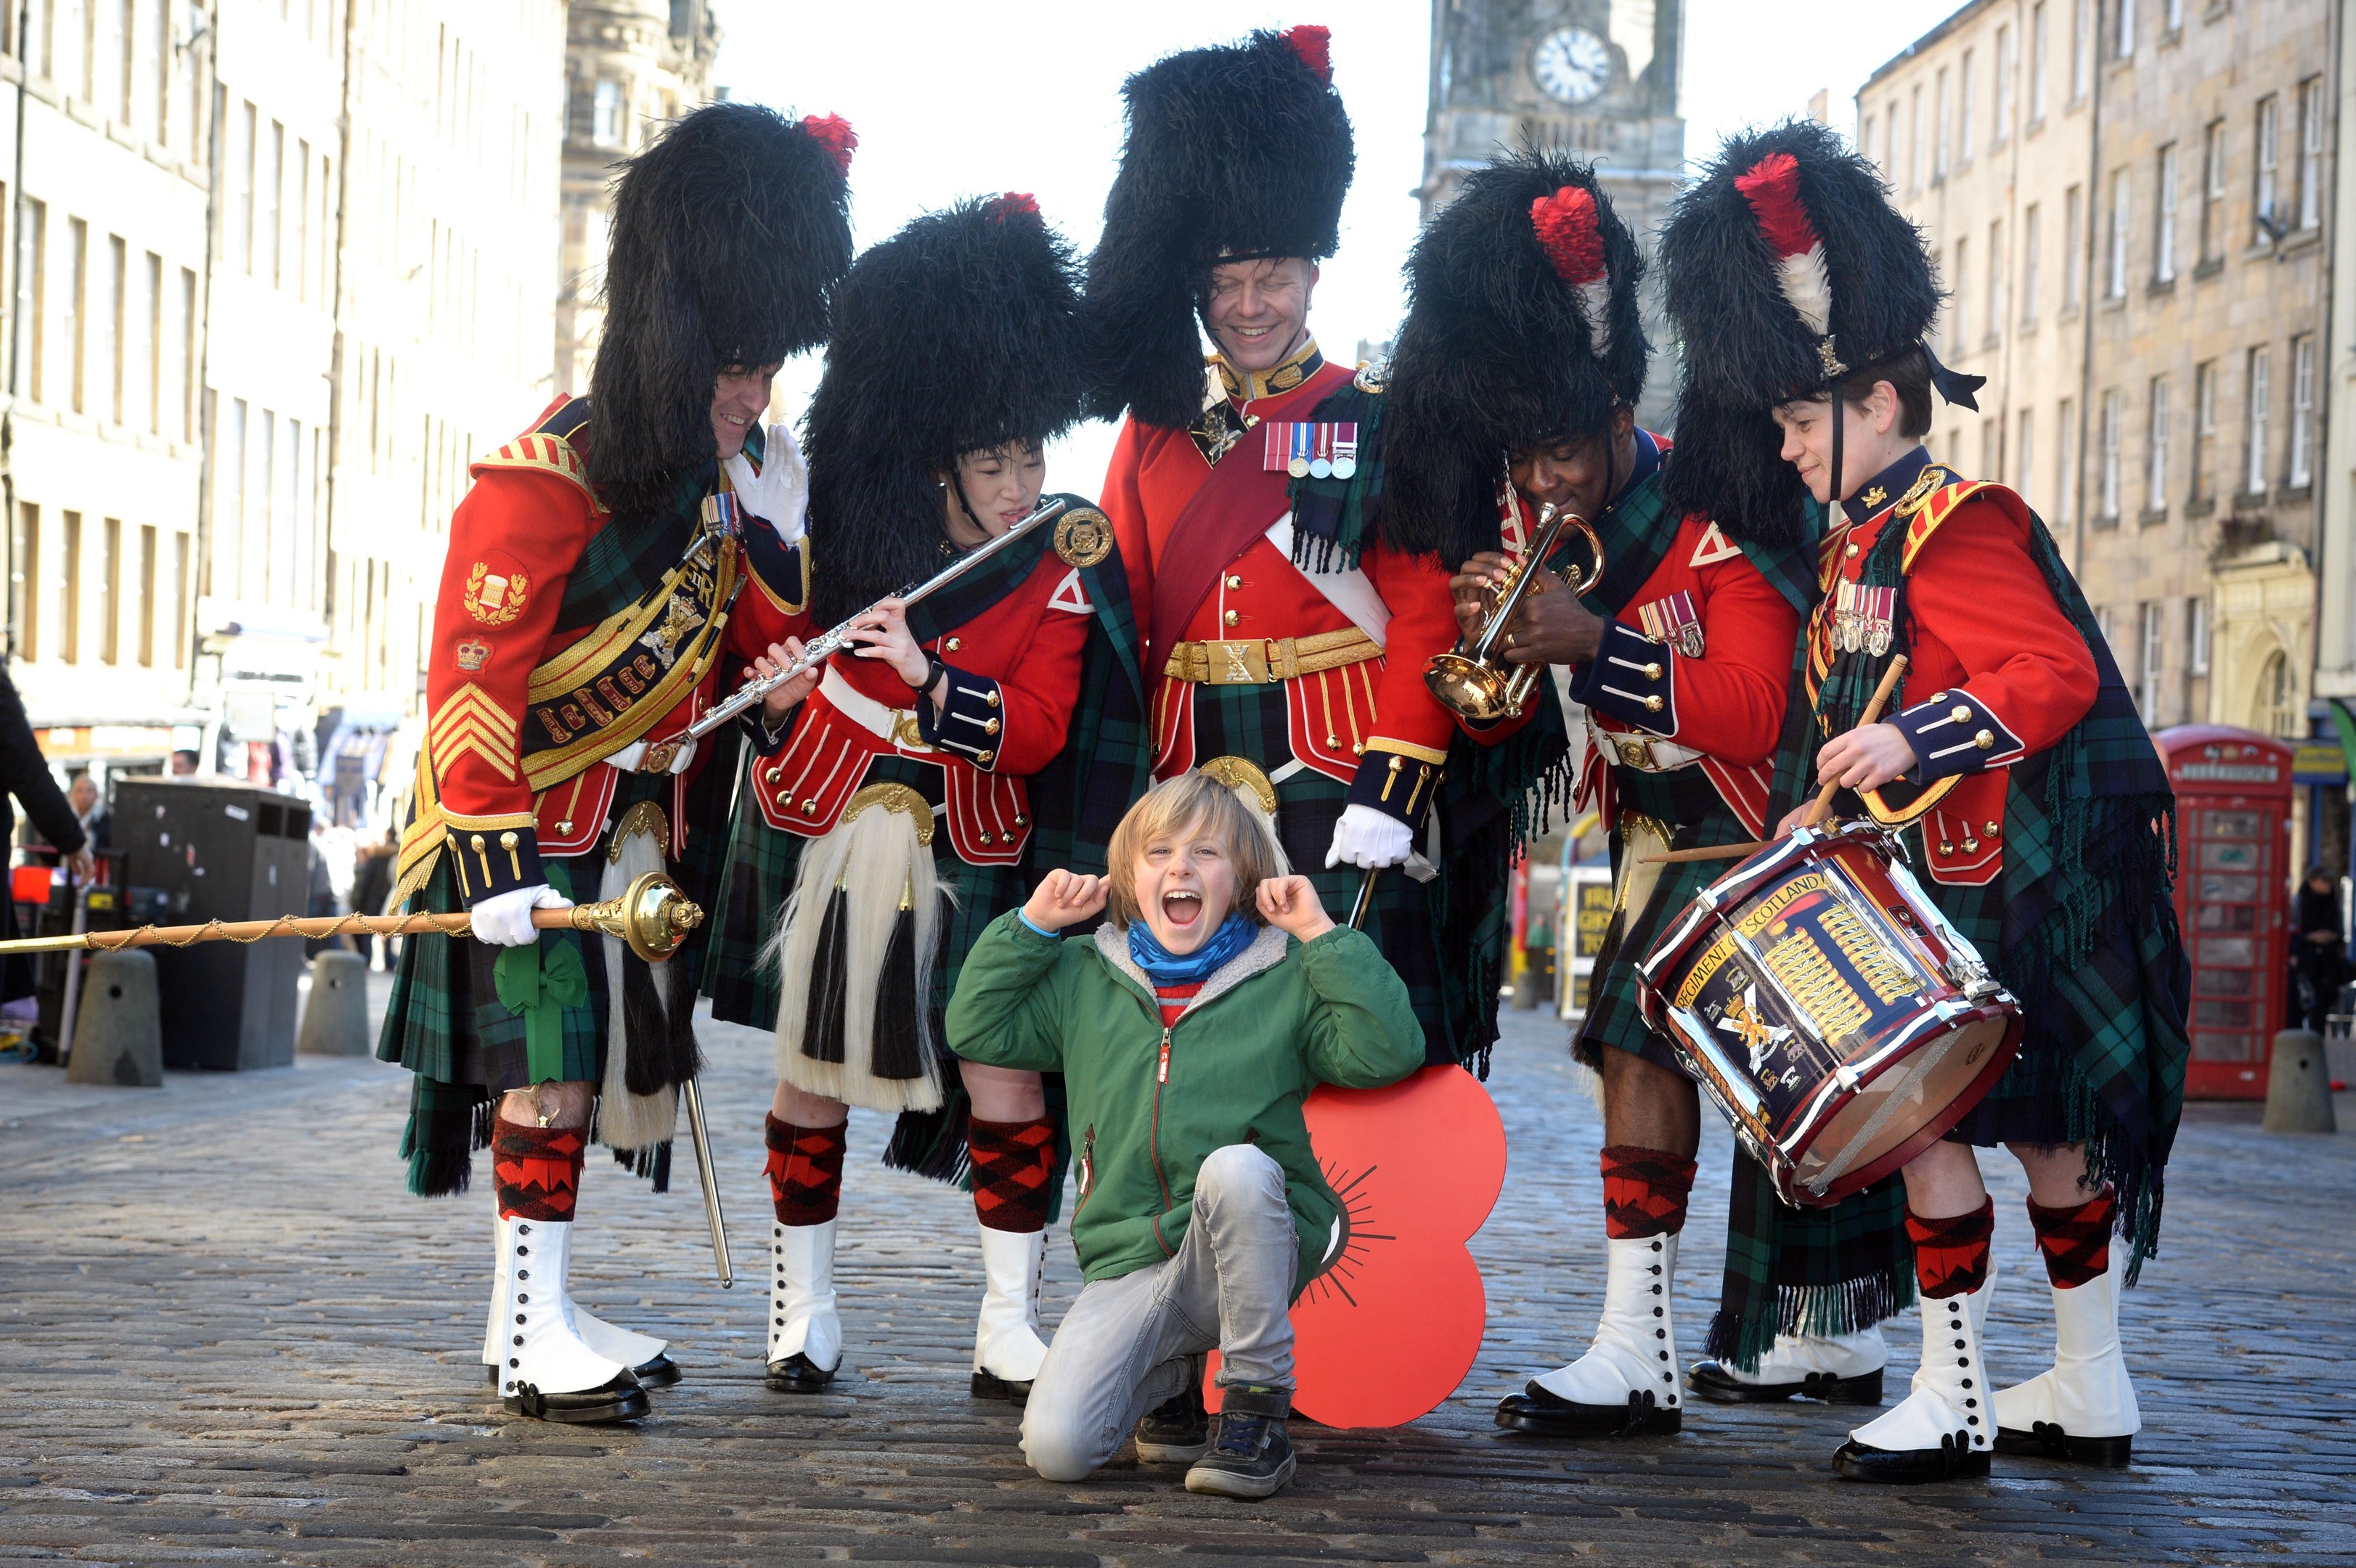 The Band of The Royal Regiment of Scotland was joined by young German tourist Julius Hagedorn, eight, who is over in Edinburgh on holiday with his family.